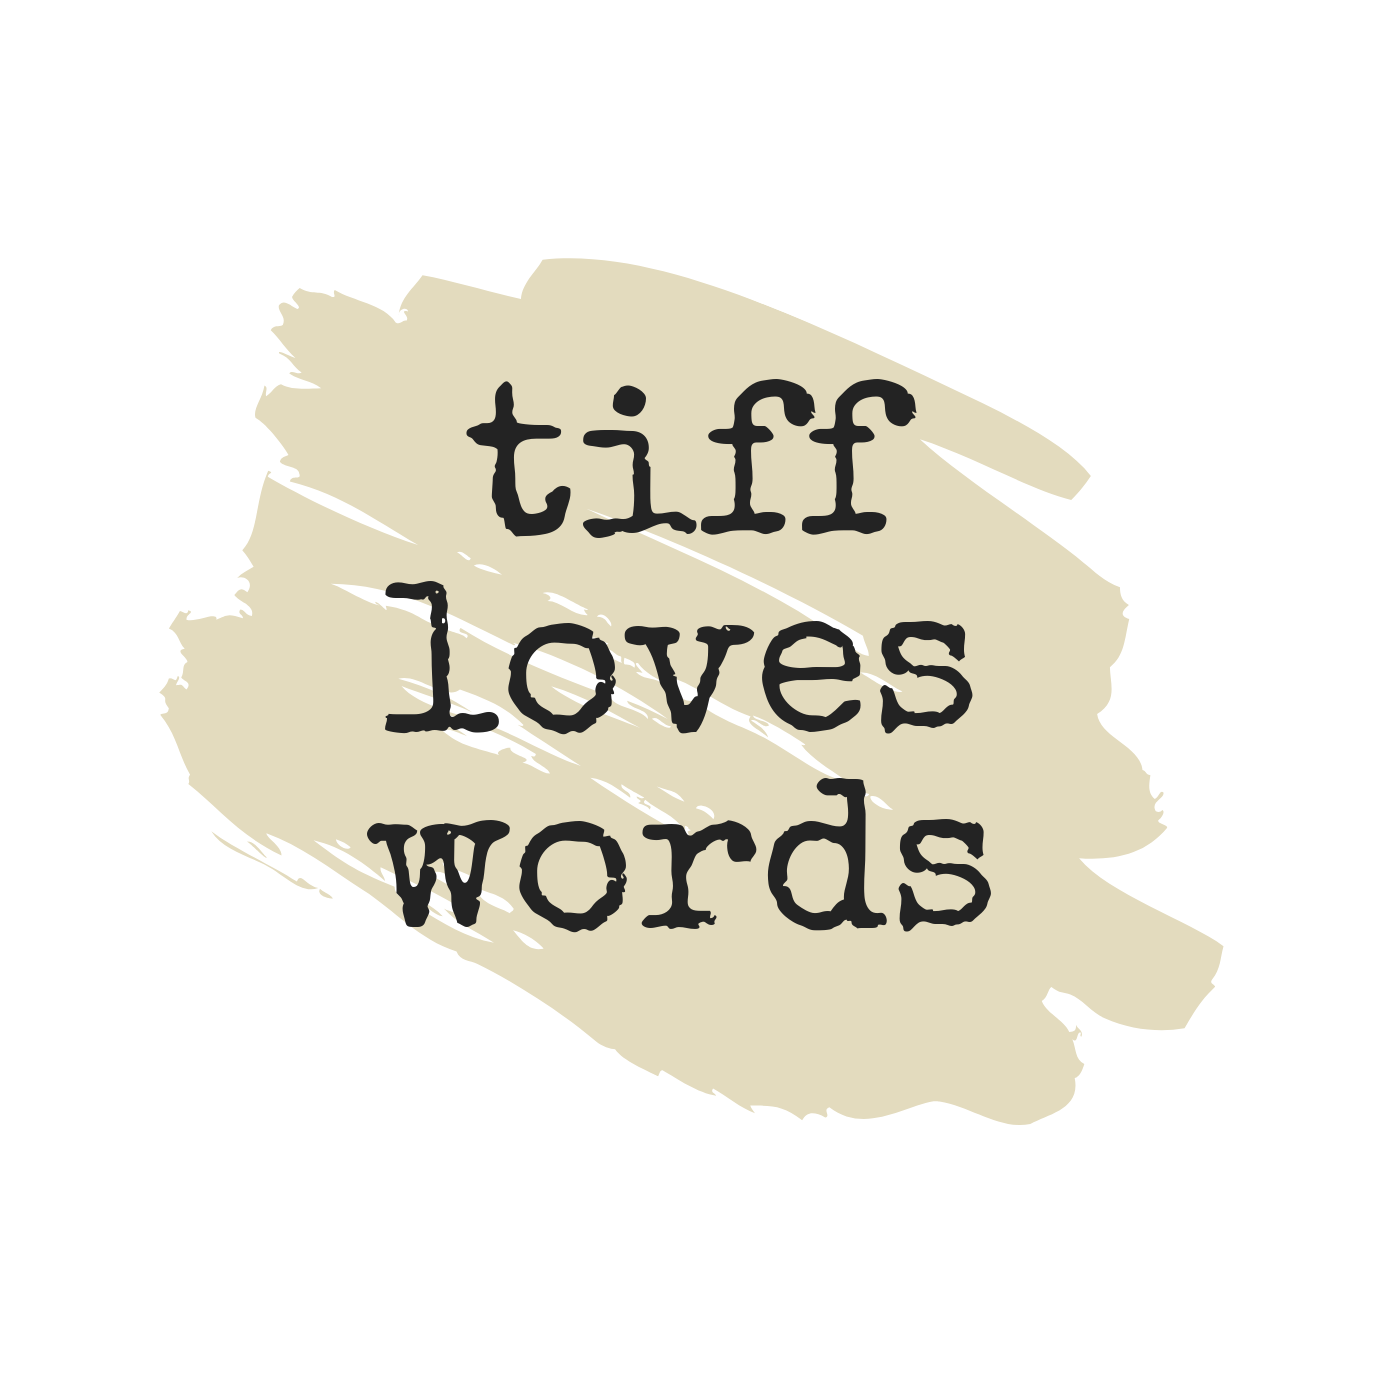 TIFF Love. Love Words. Poetic Words. Poetic Words are. This love words